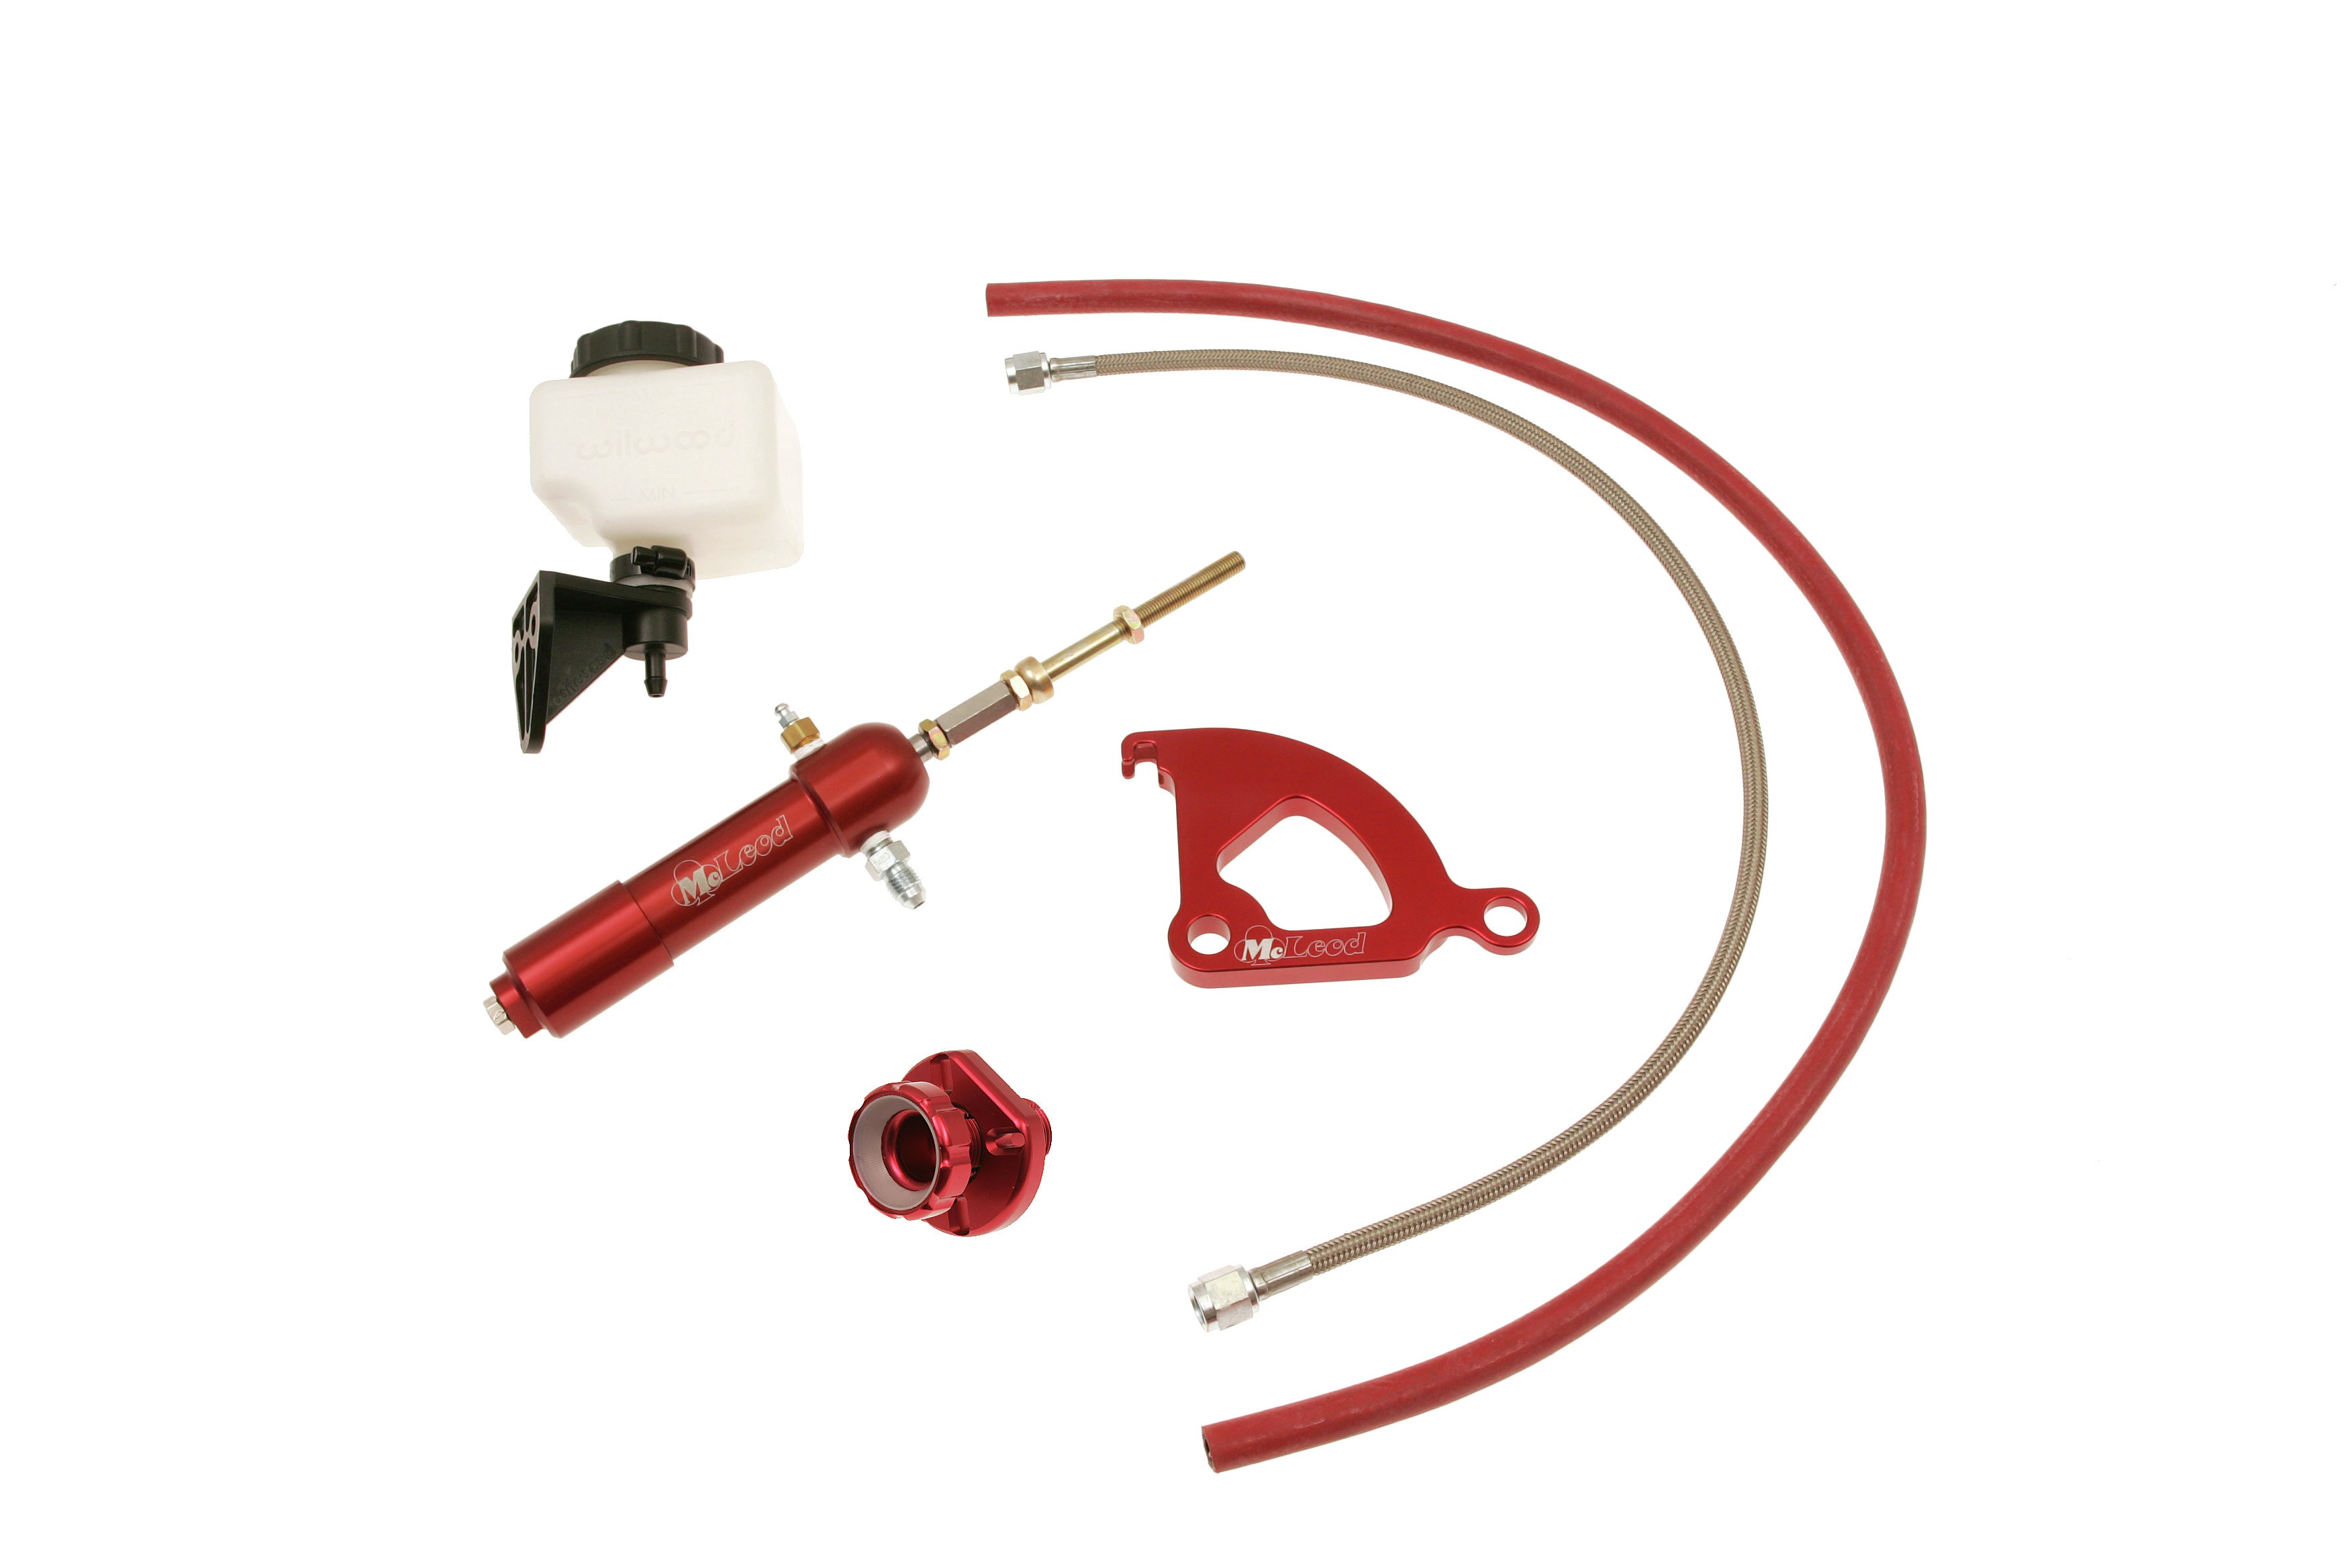 McLeod 14-326 Hydraulic T.O. Brg Kit for Mustang - Click Image to Close